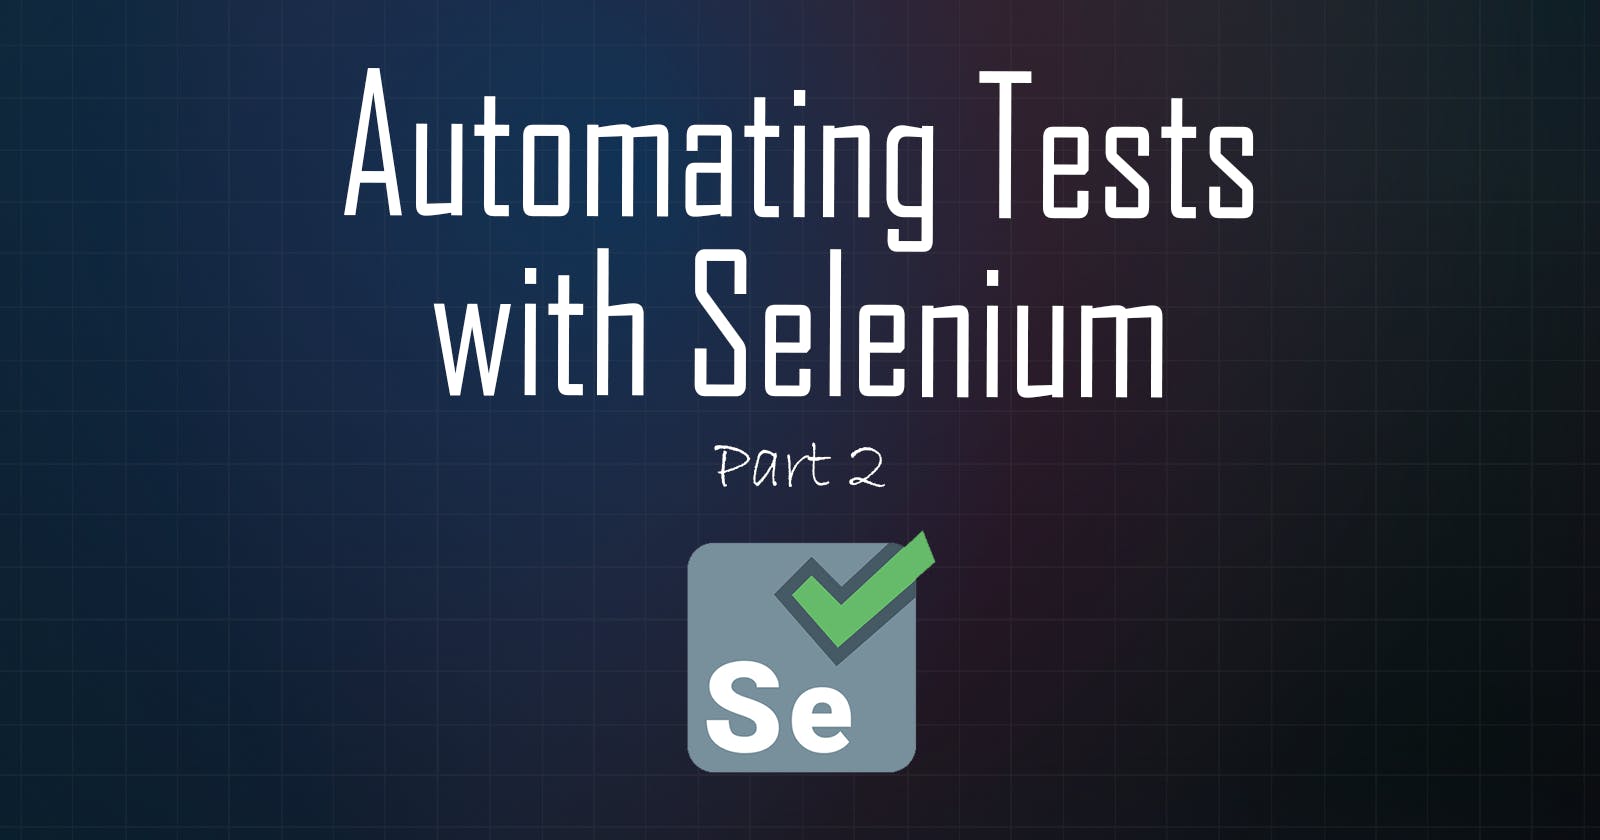 Automating Tests with Selenium #2: Assertion-based Tests